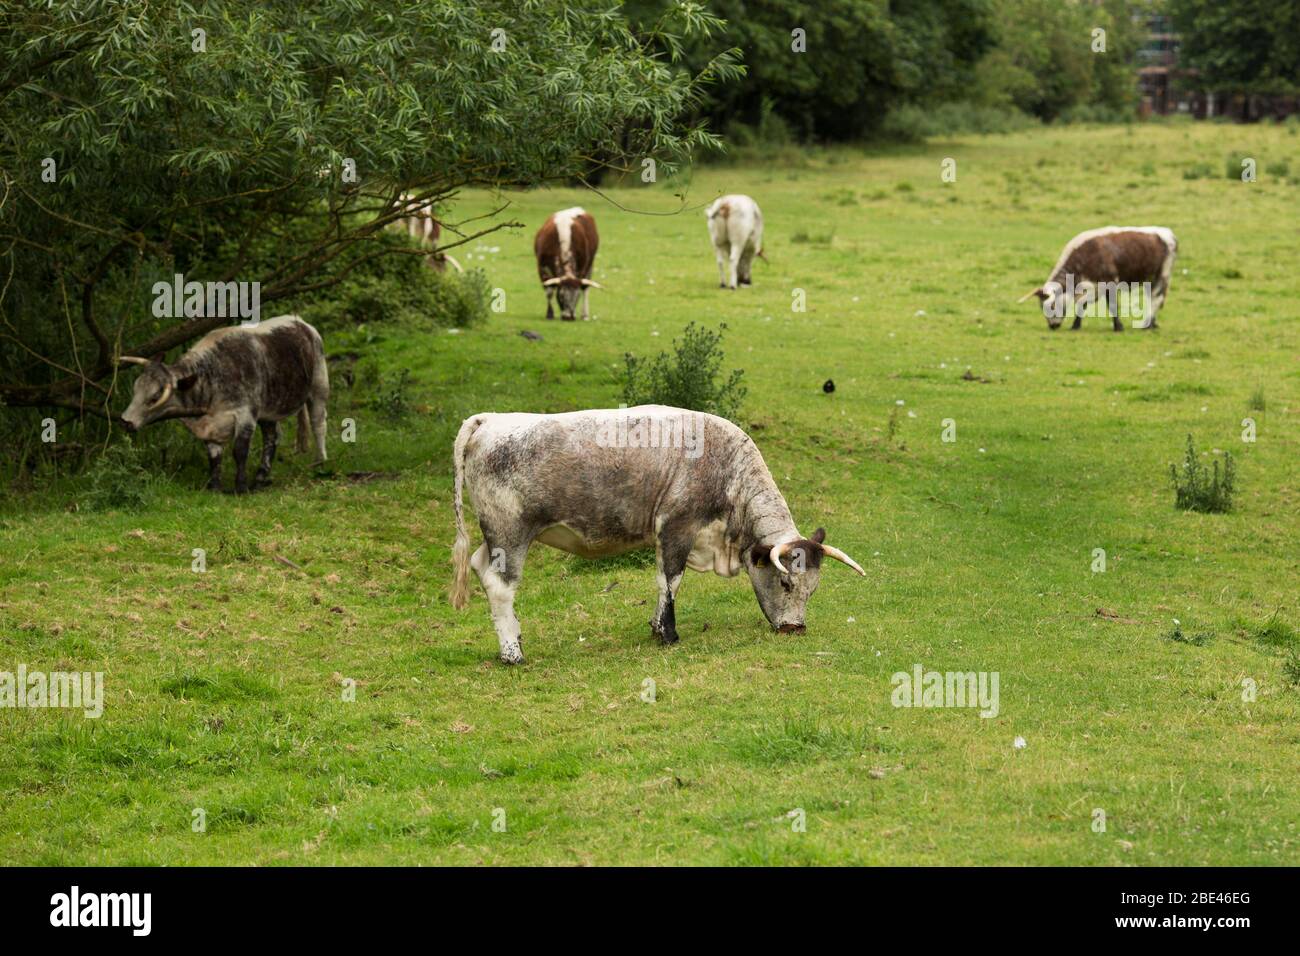 English longhorn cows grazing in a field near the Cam River in Cambridge, England, United Kingdom. Stock Photo